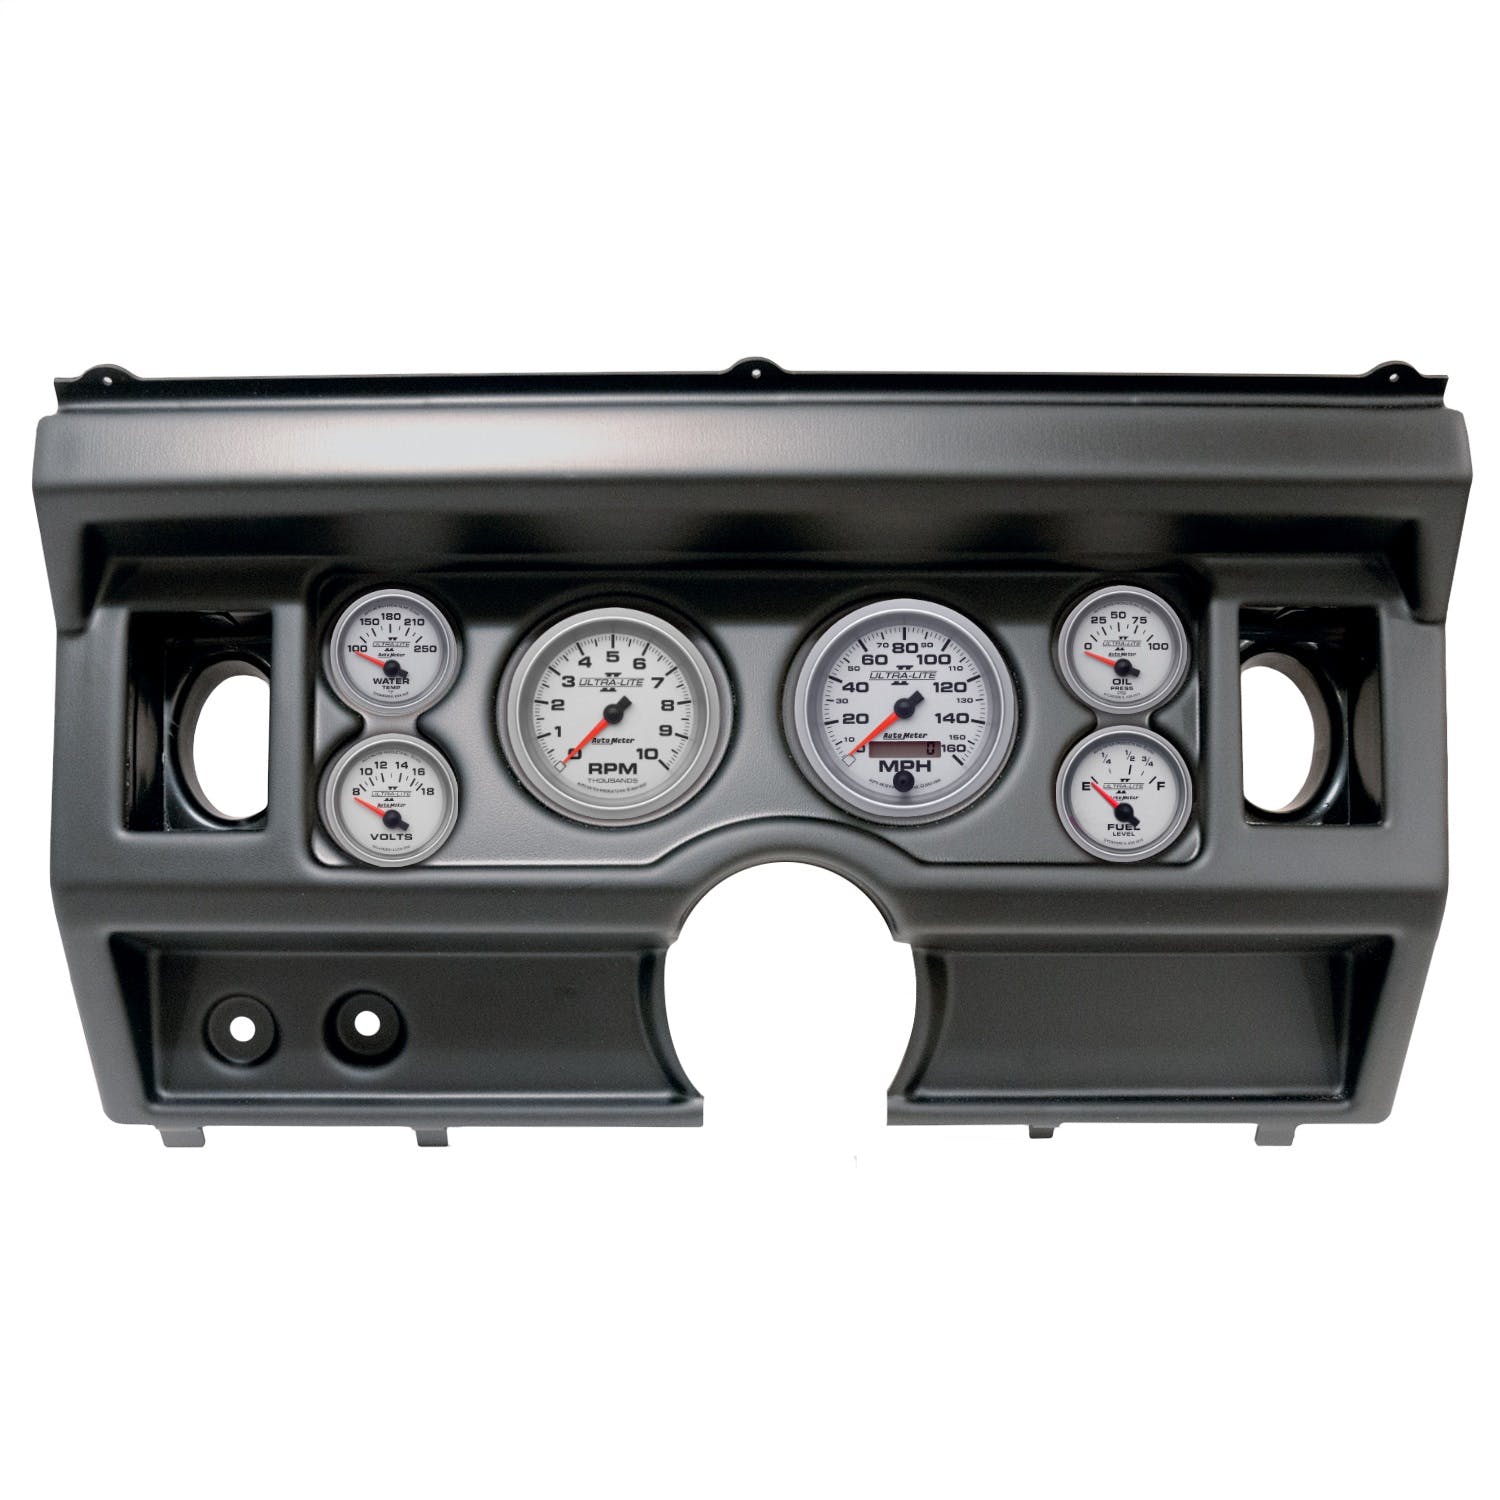 AutoMeter Products 2919-14 6 Gauge Direct-Fit Dash Kit, Ford Truck Ac 80-86, Ultra-Lite II